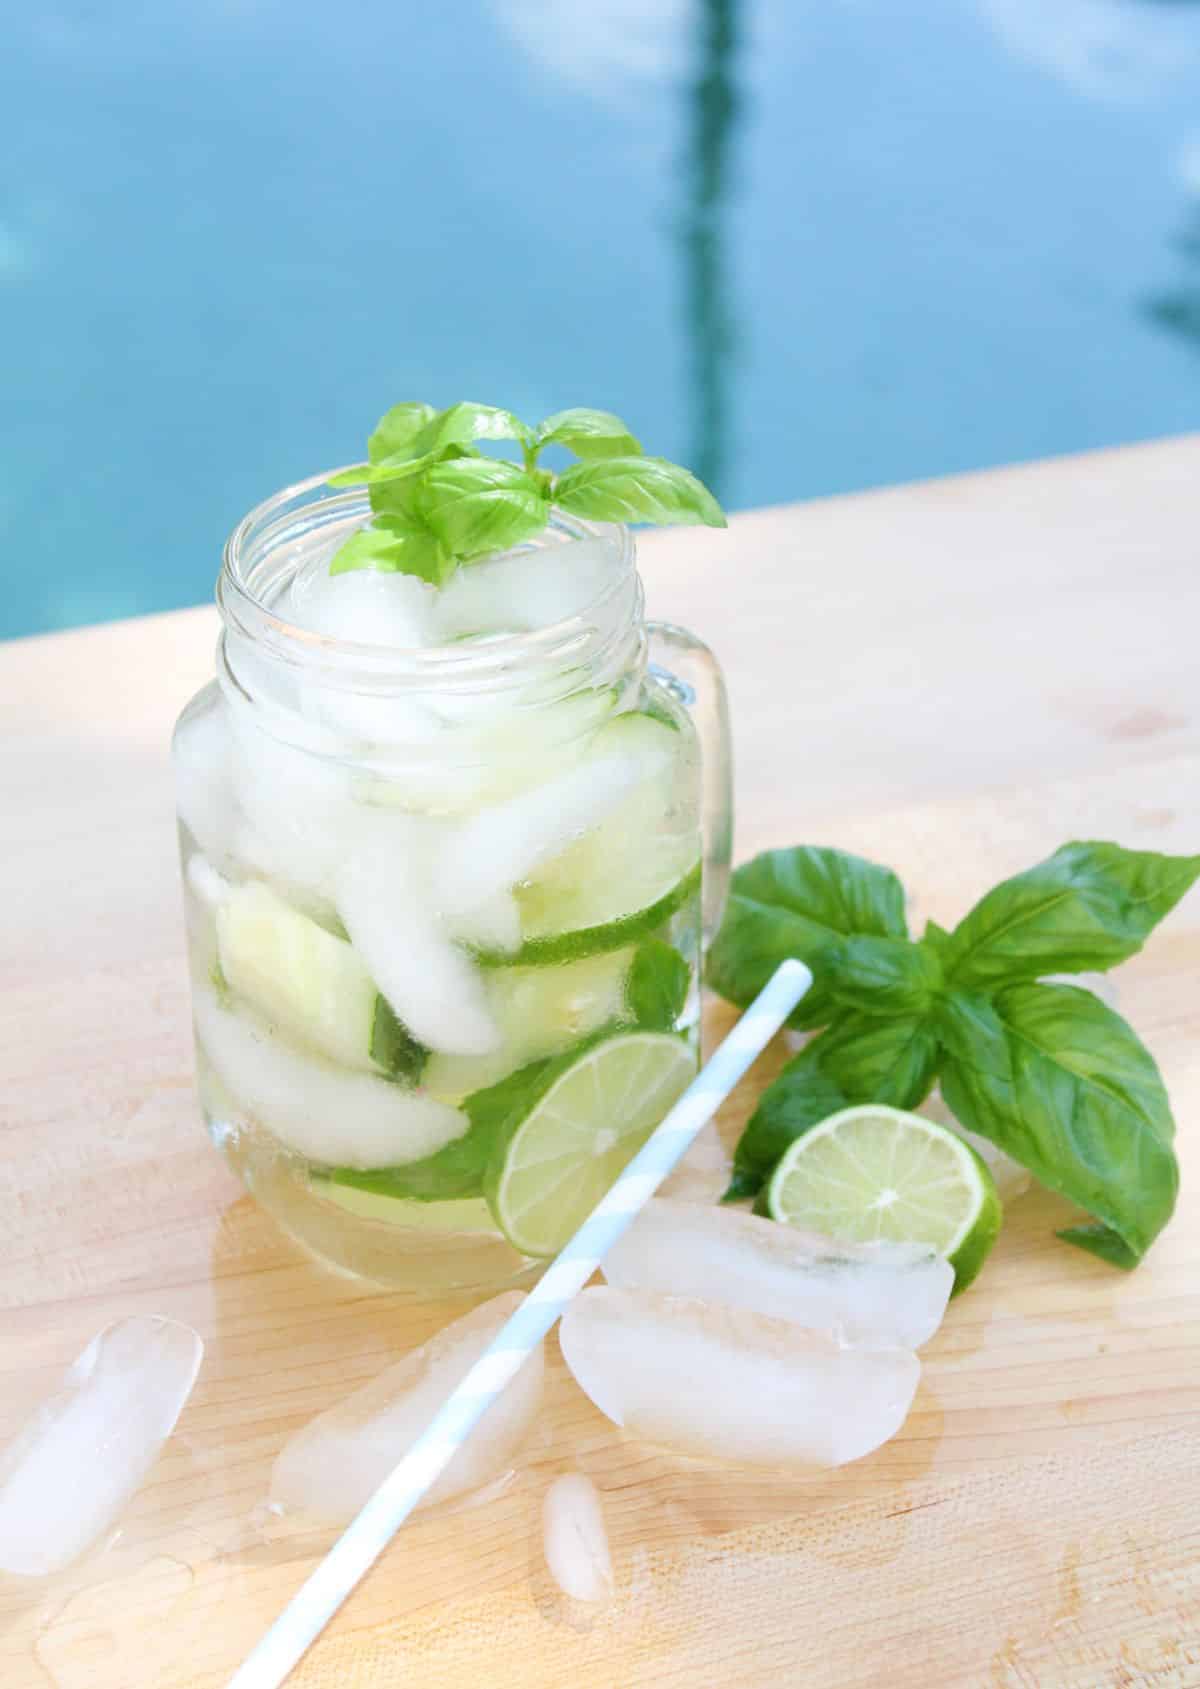 Cucumber Lime Vodka Cocktail in a serving glass, garnished with basil leaves.